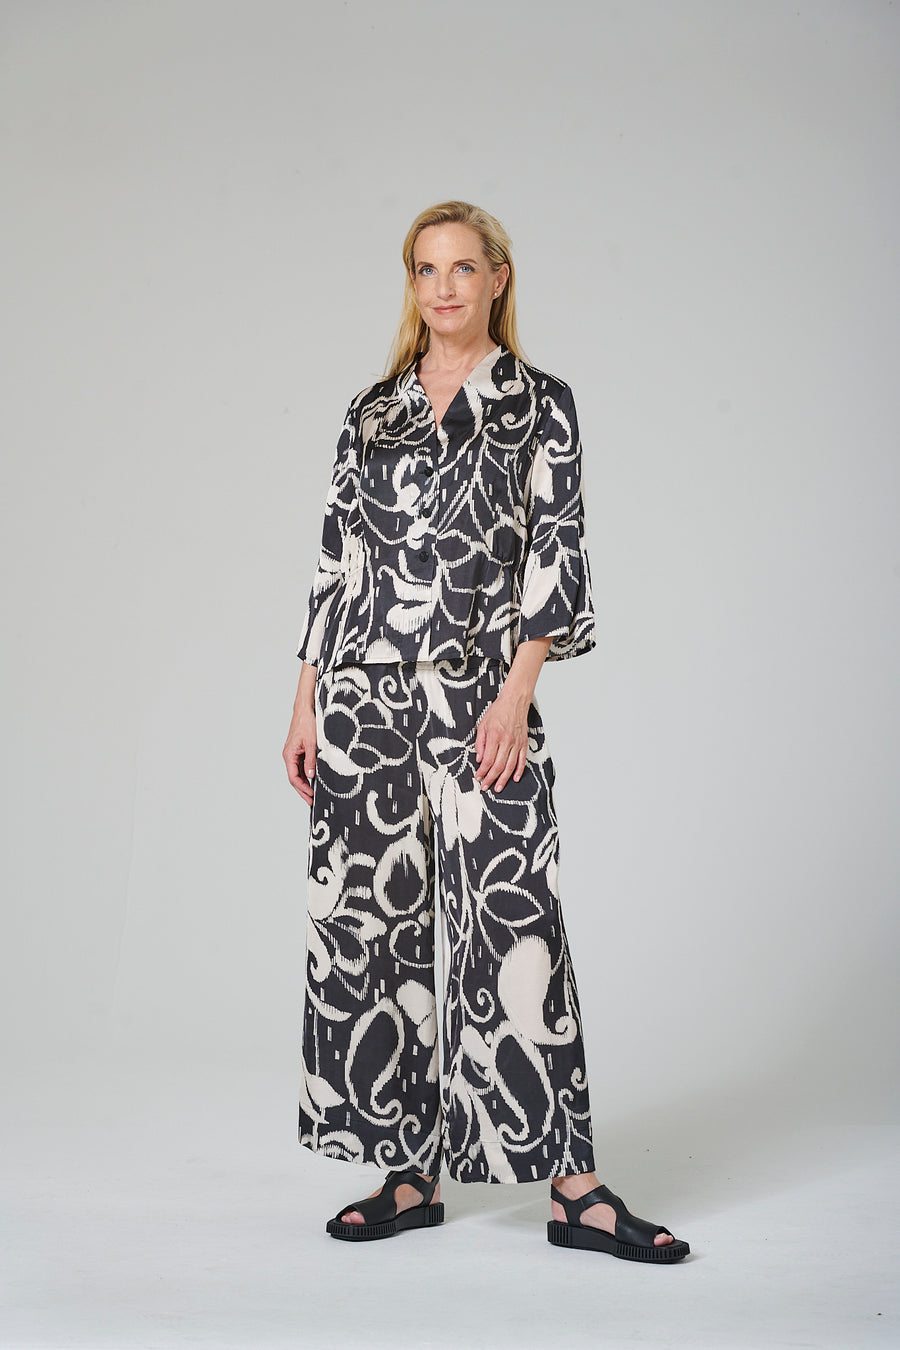 Printed viscose trousers (330h1) in two print variants